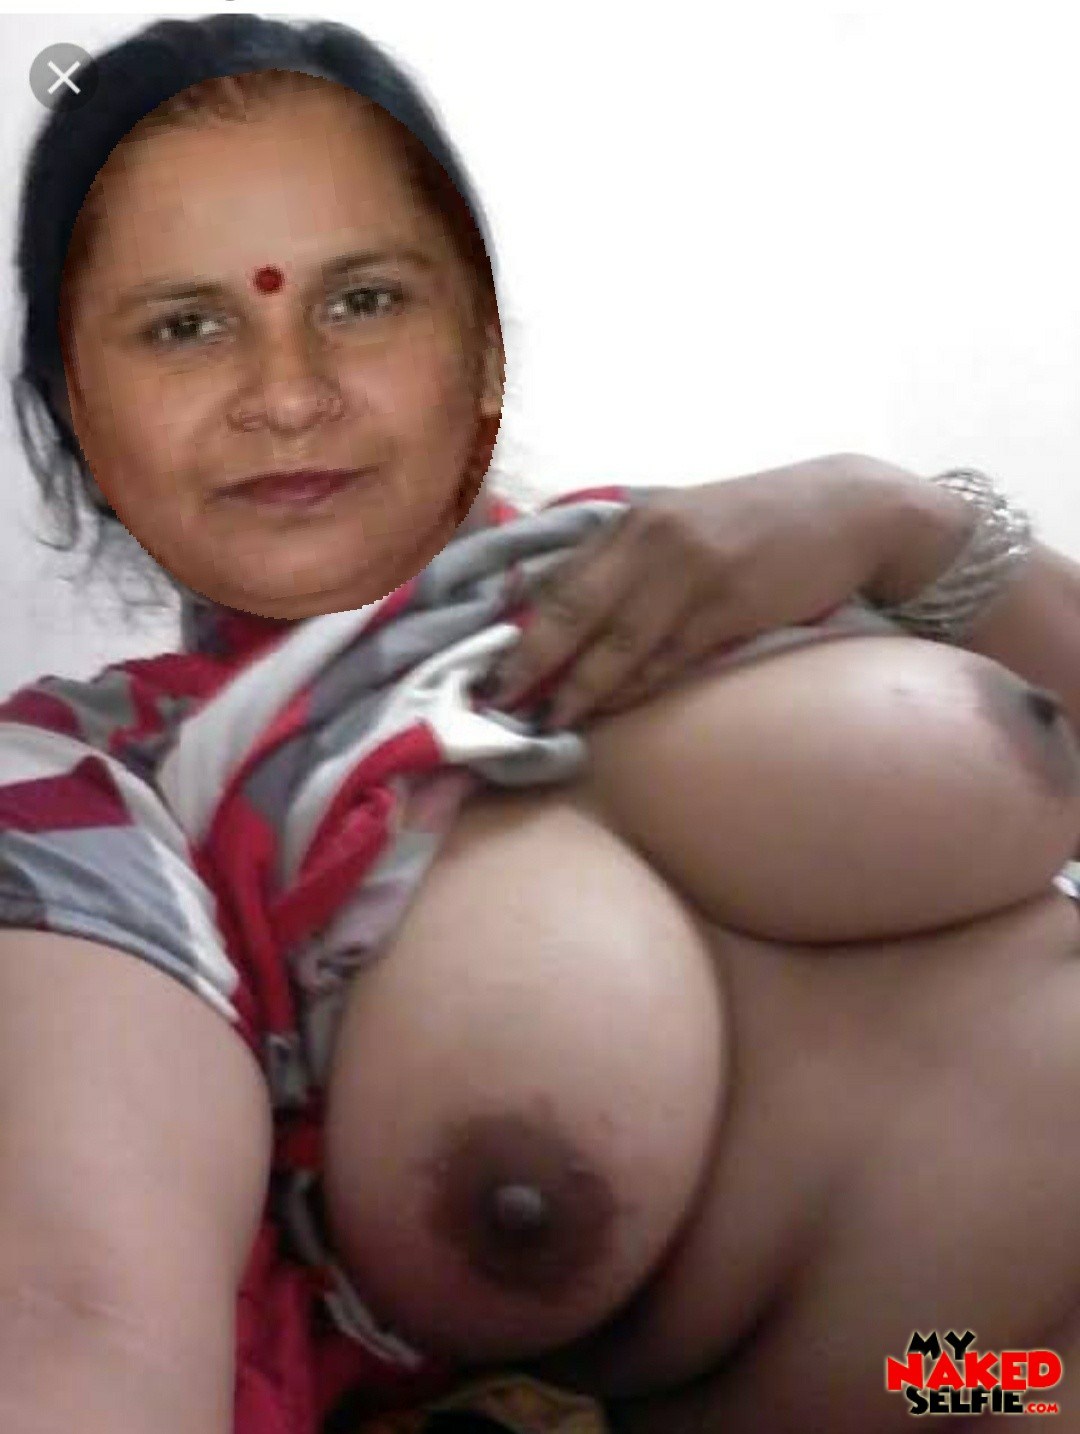 Old Indian Lady Nude Breast - Naked Indian Women with Big Breasts (54 photos) - sex eporner pics